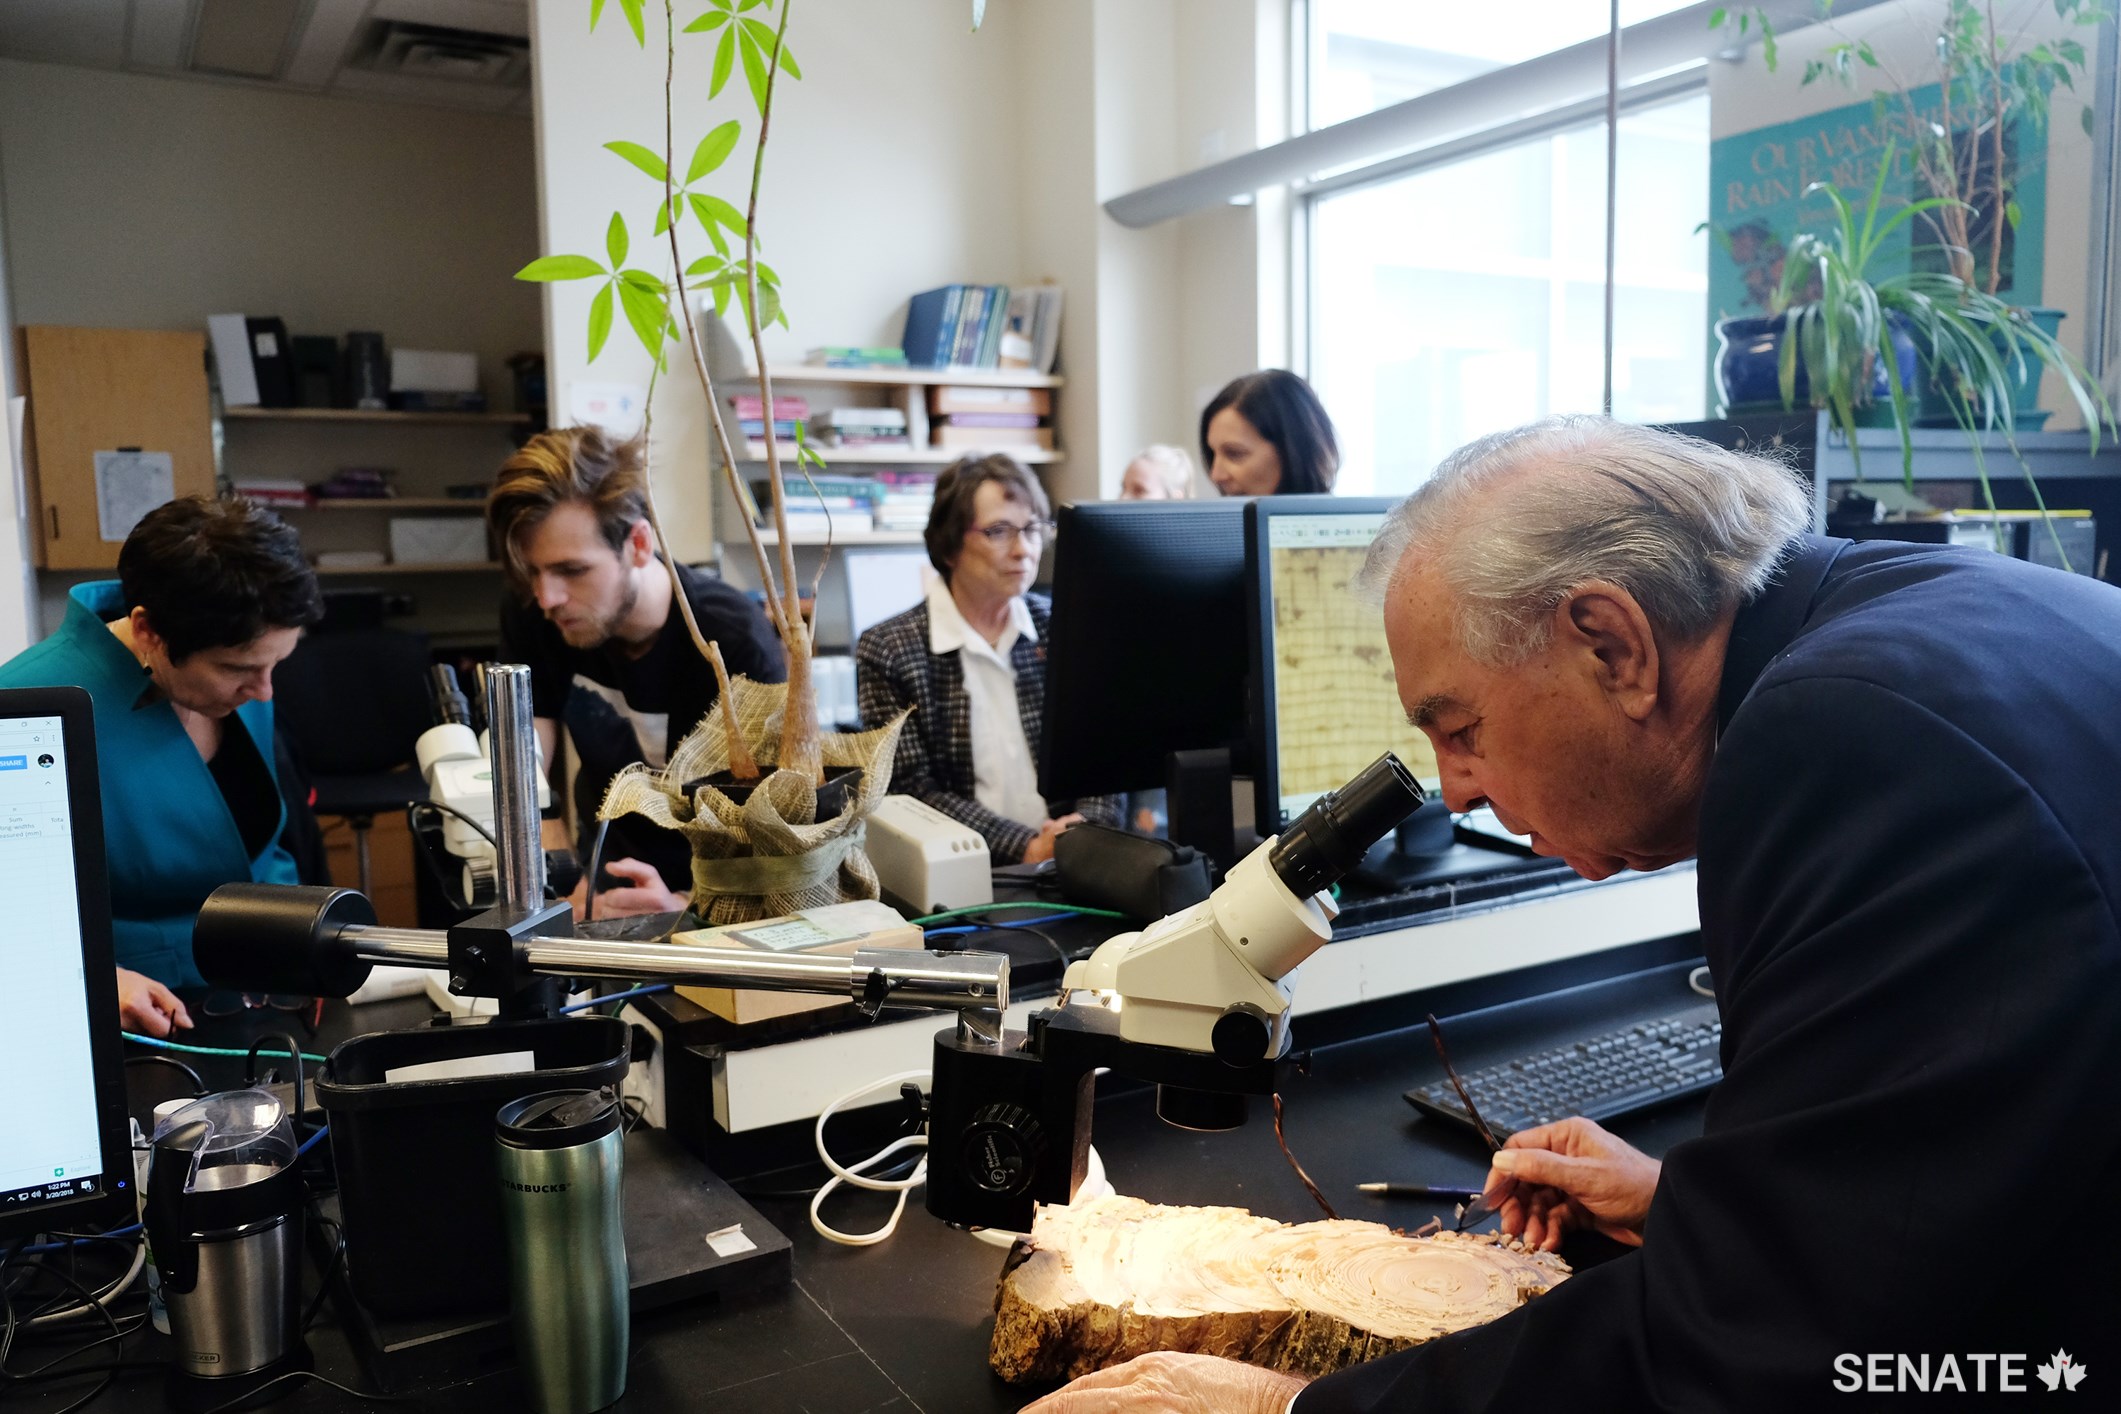 Senator Ghislain Maltais uses a microscope to get a closer look at a wood core sample while Senators Raymonde Gagné and Diane F. Griffin listen to students.